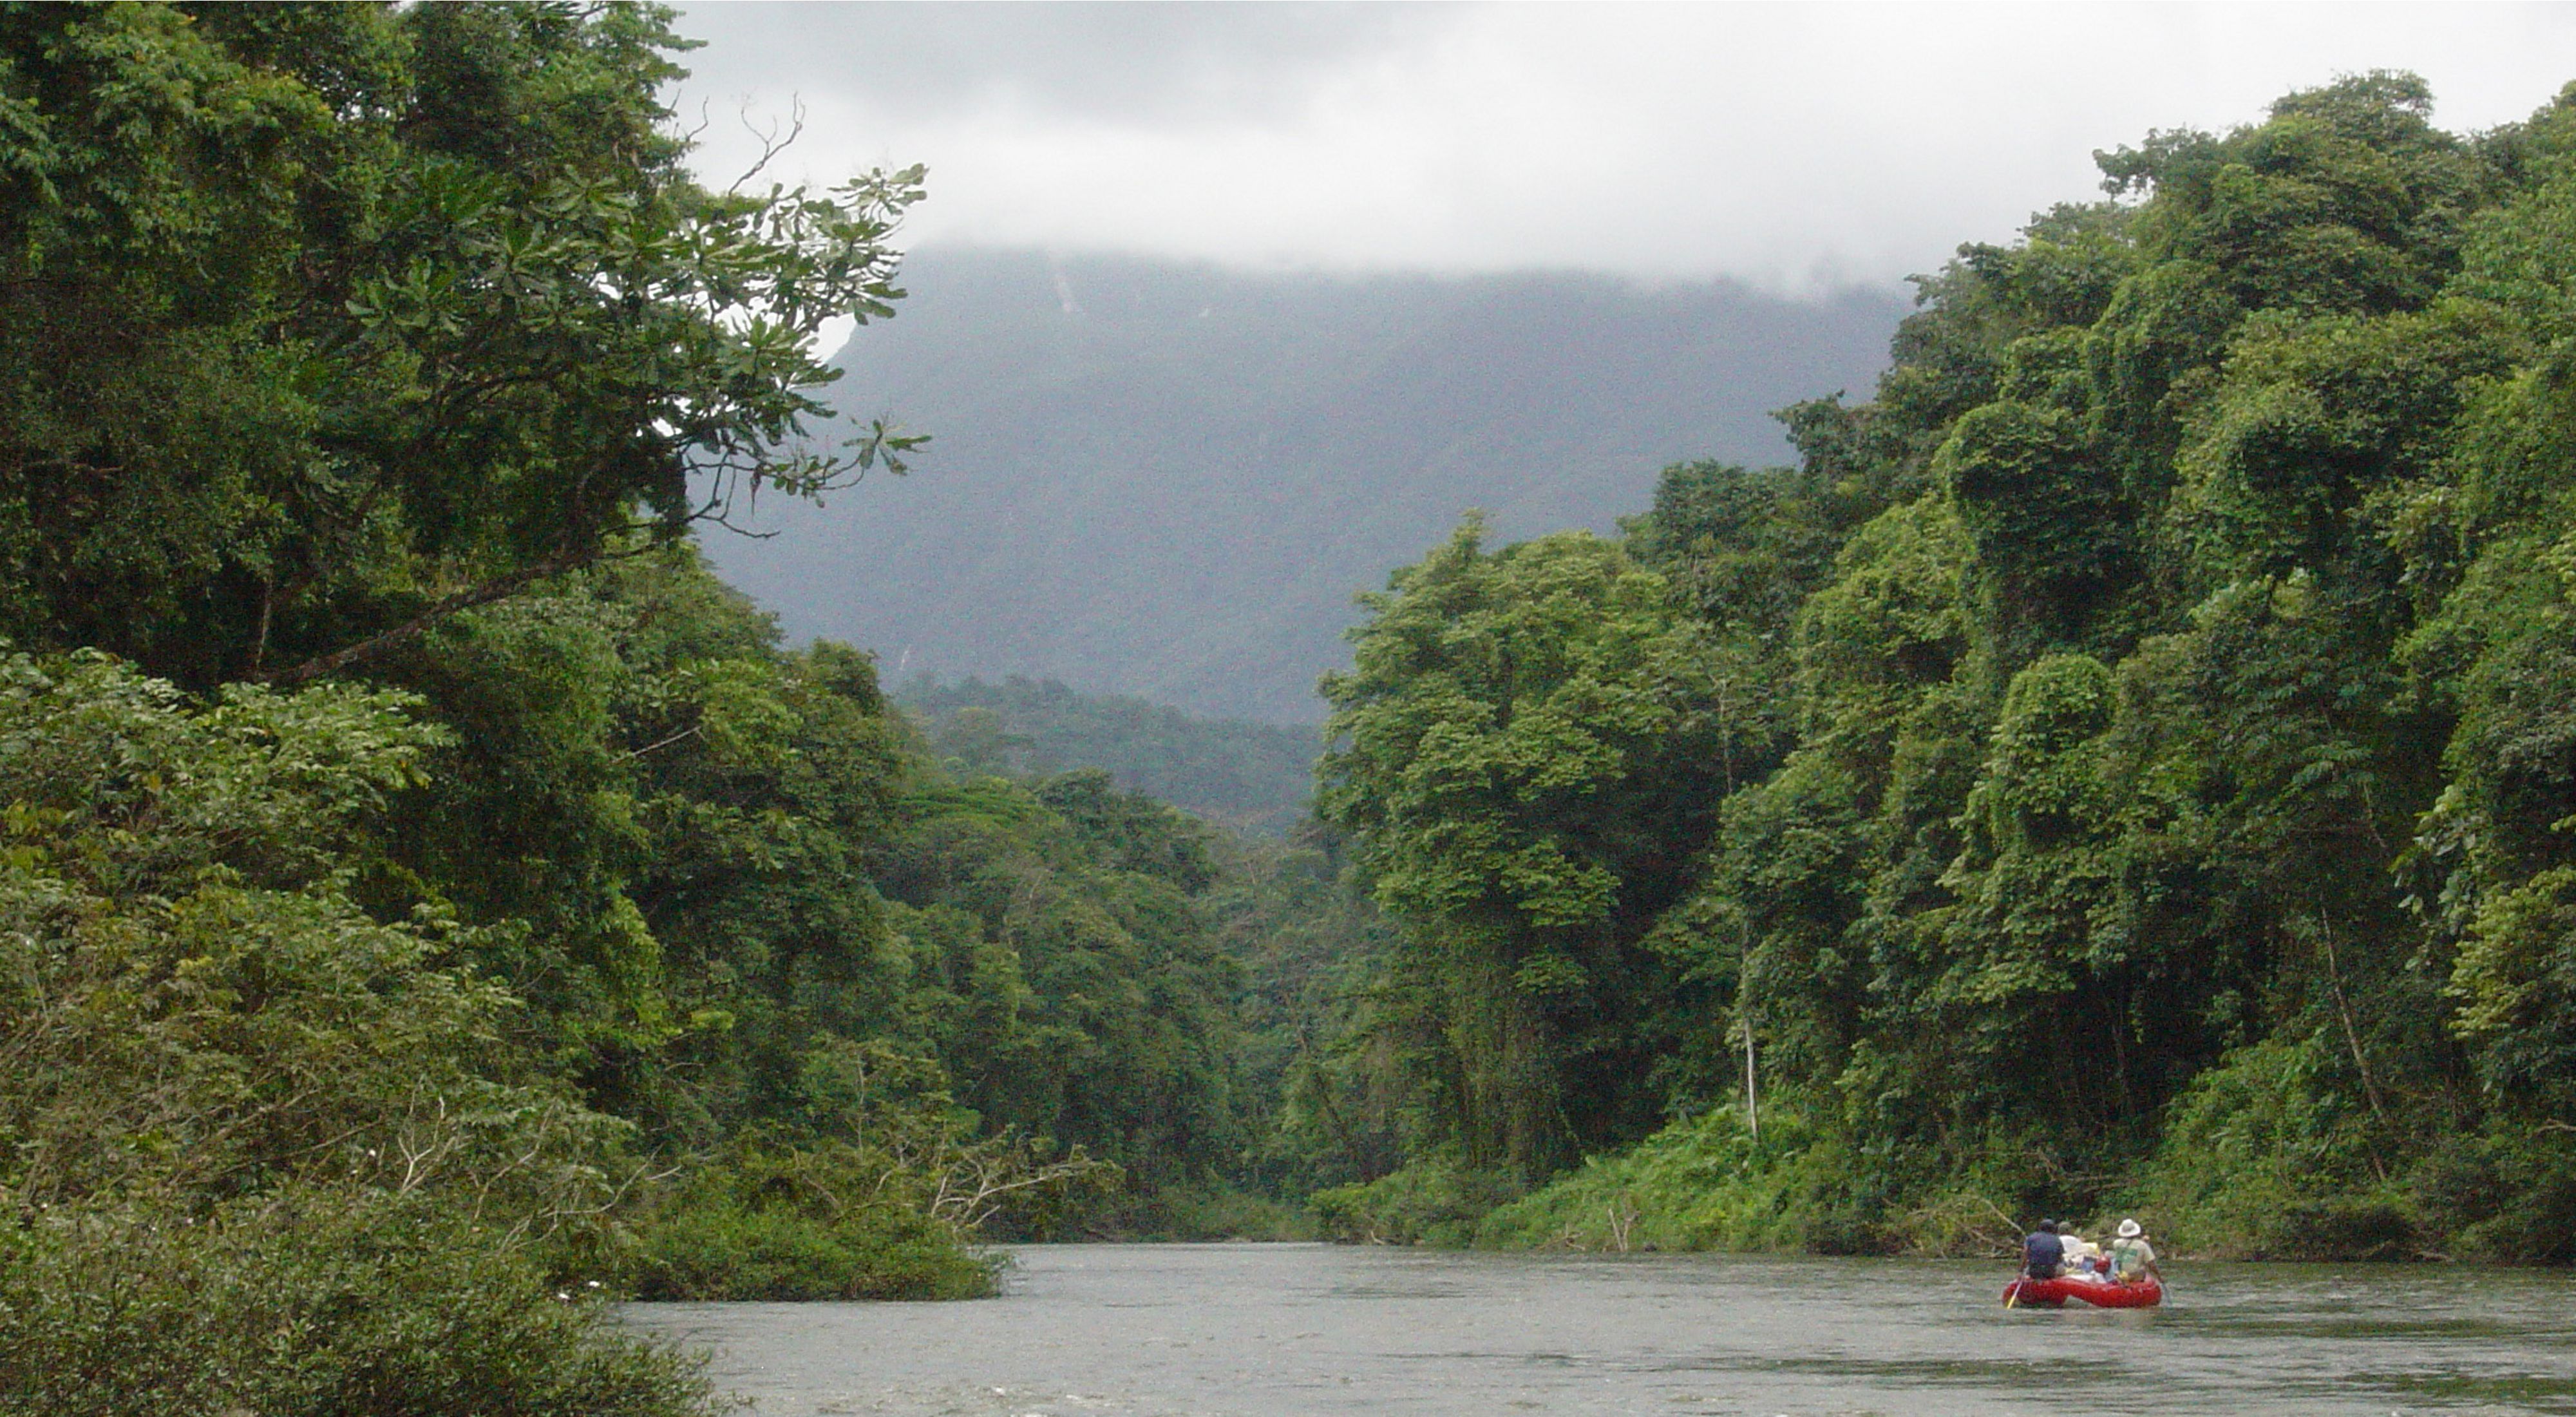 Rafting through the remote rainforest on the Rio Platano